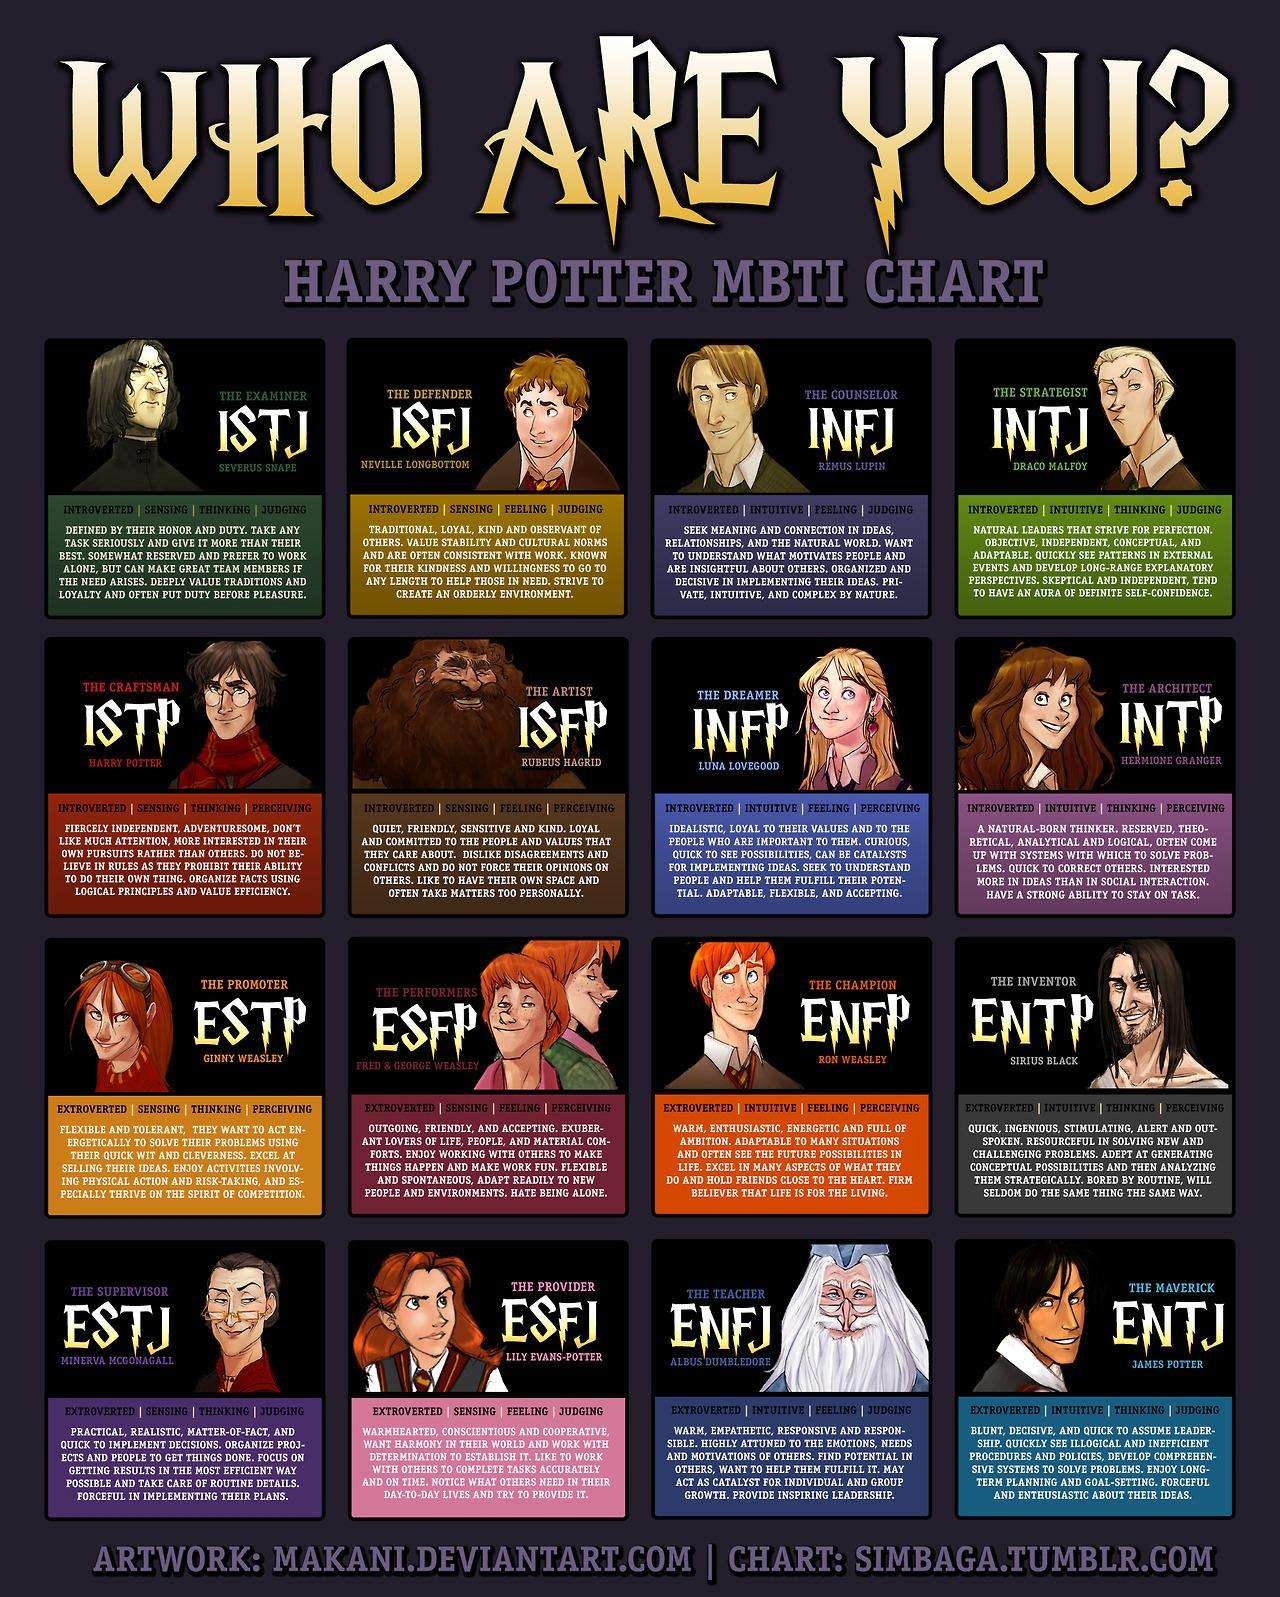 Do You Know Your Harry Potter MBTI?